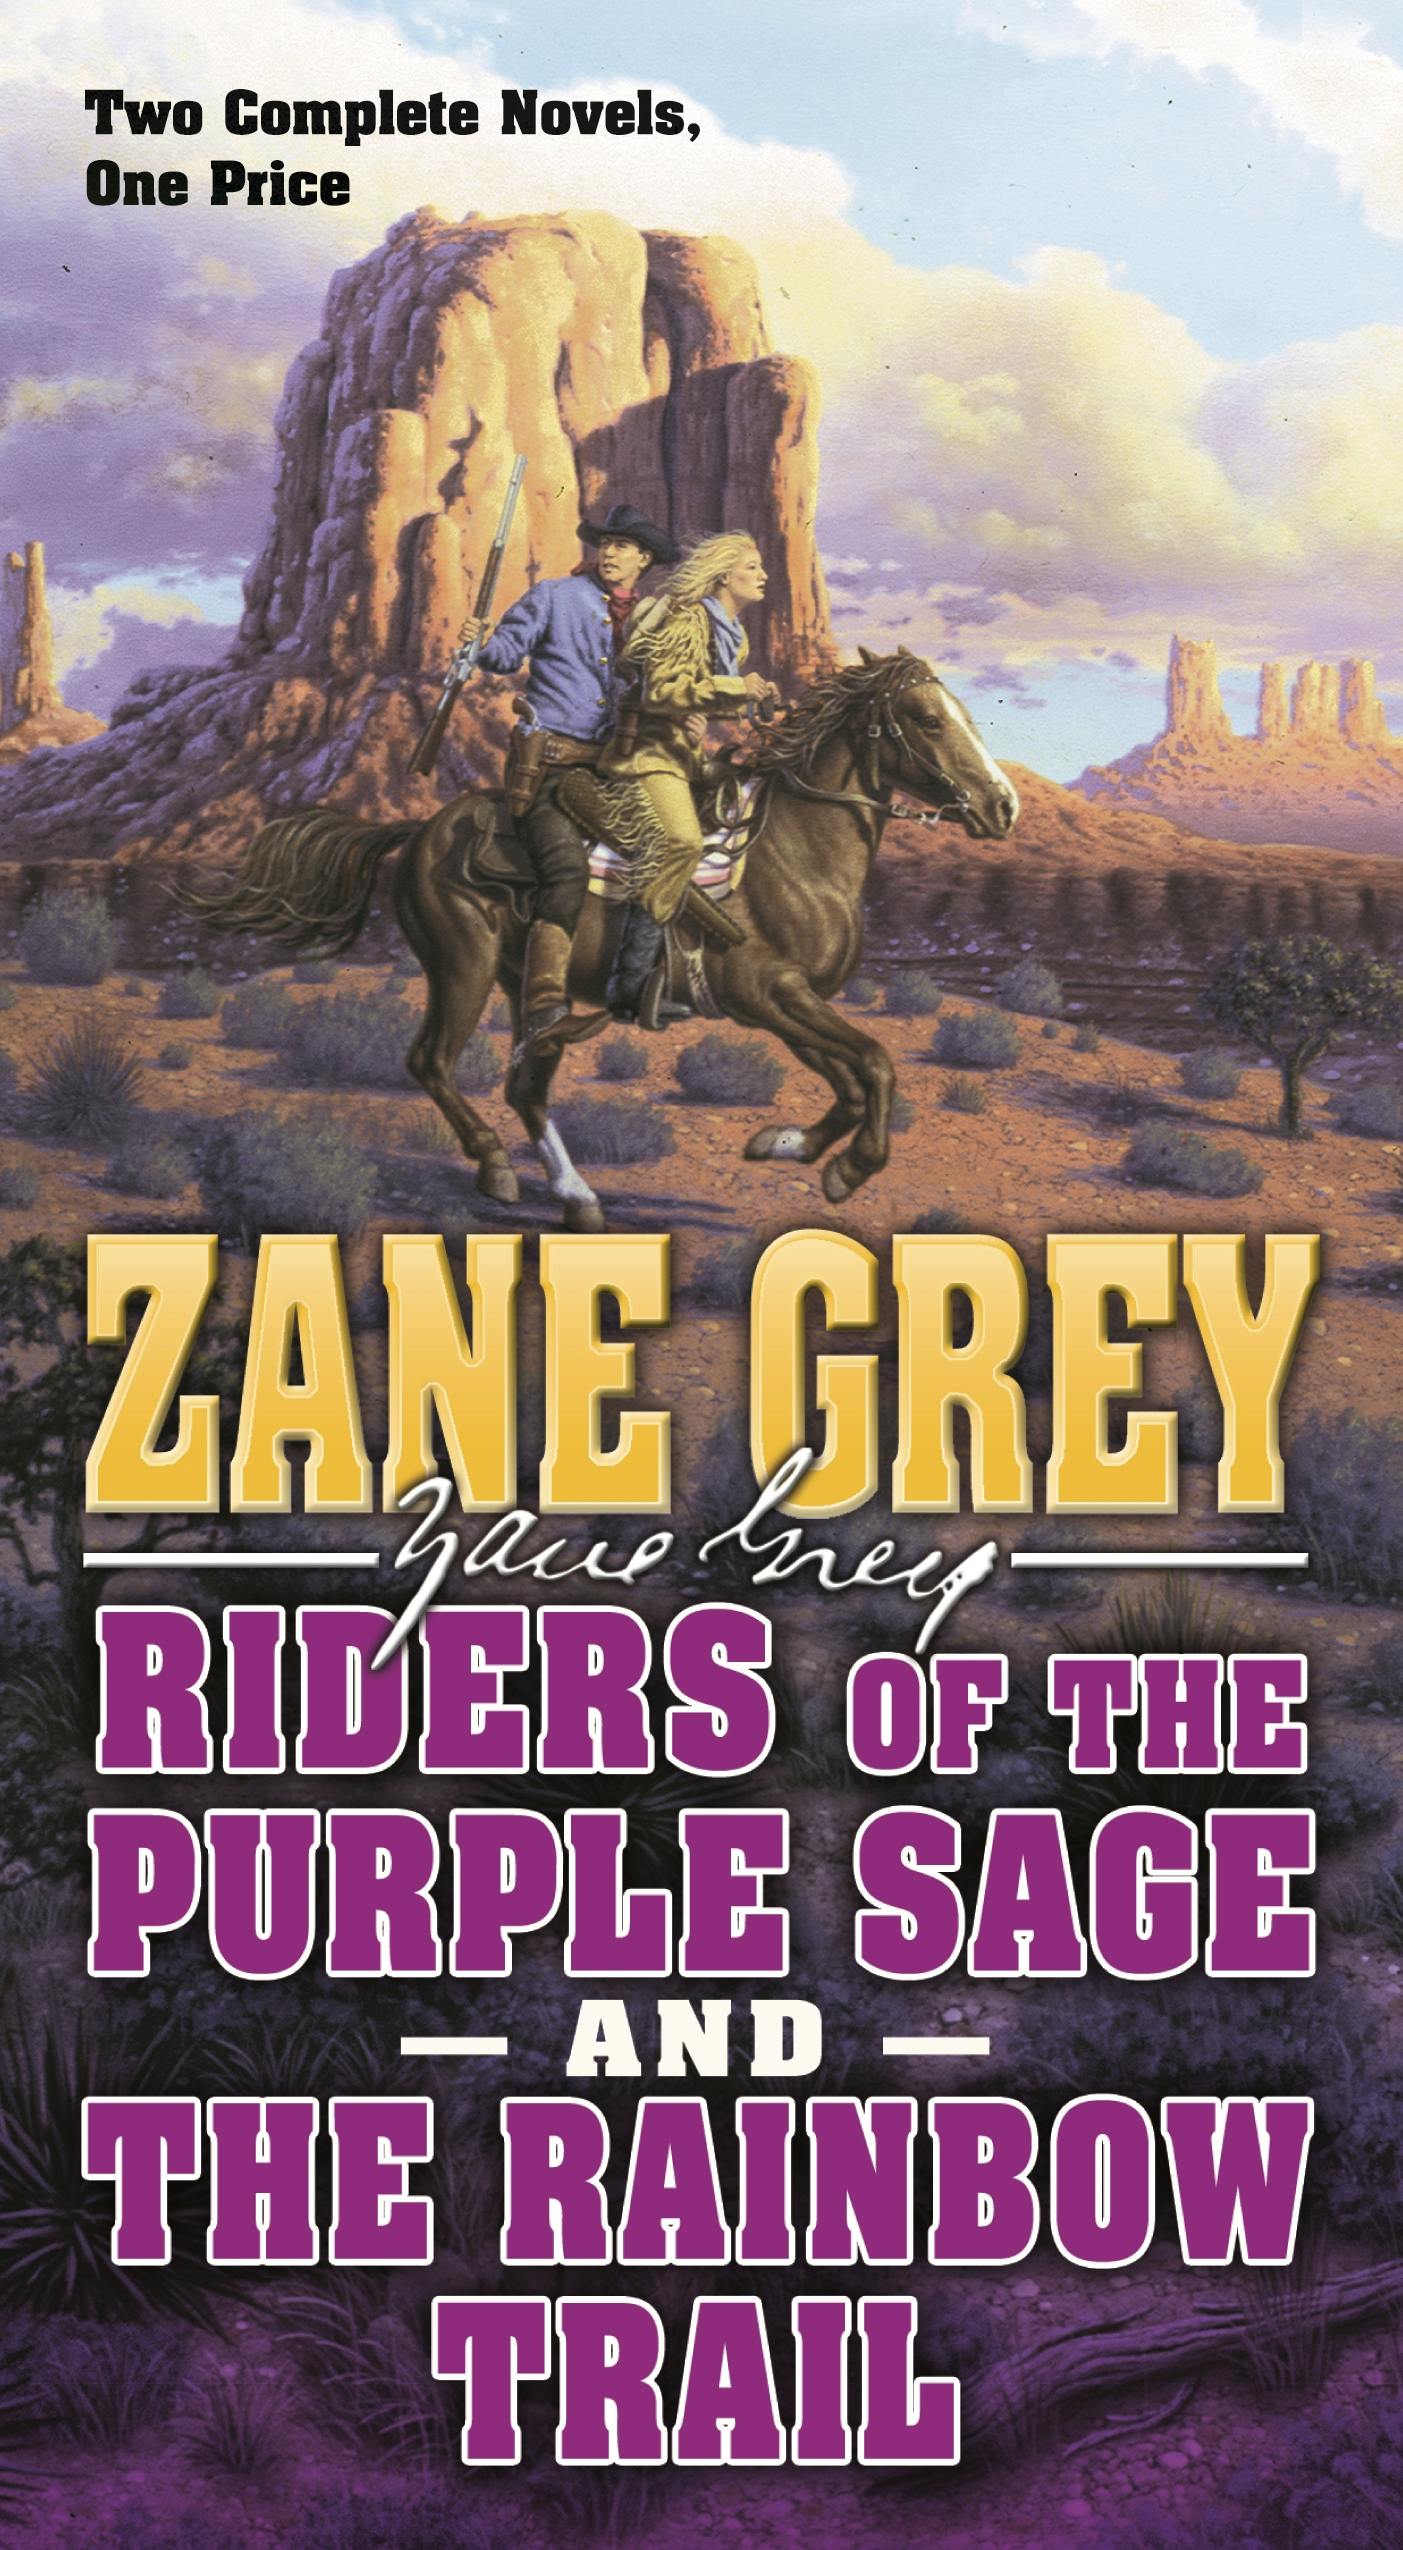 Cover for the book titled as: Riders of the Purple Sage and The Rainbow Trail